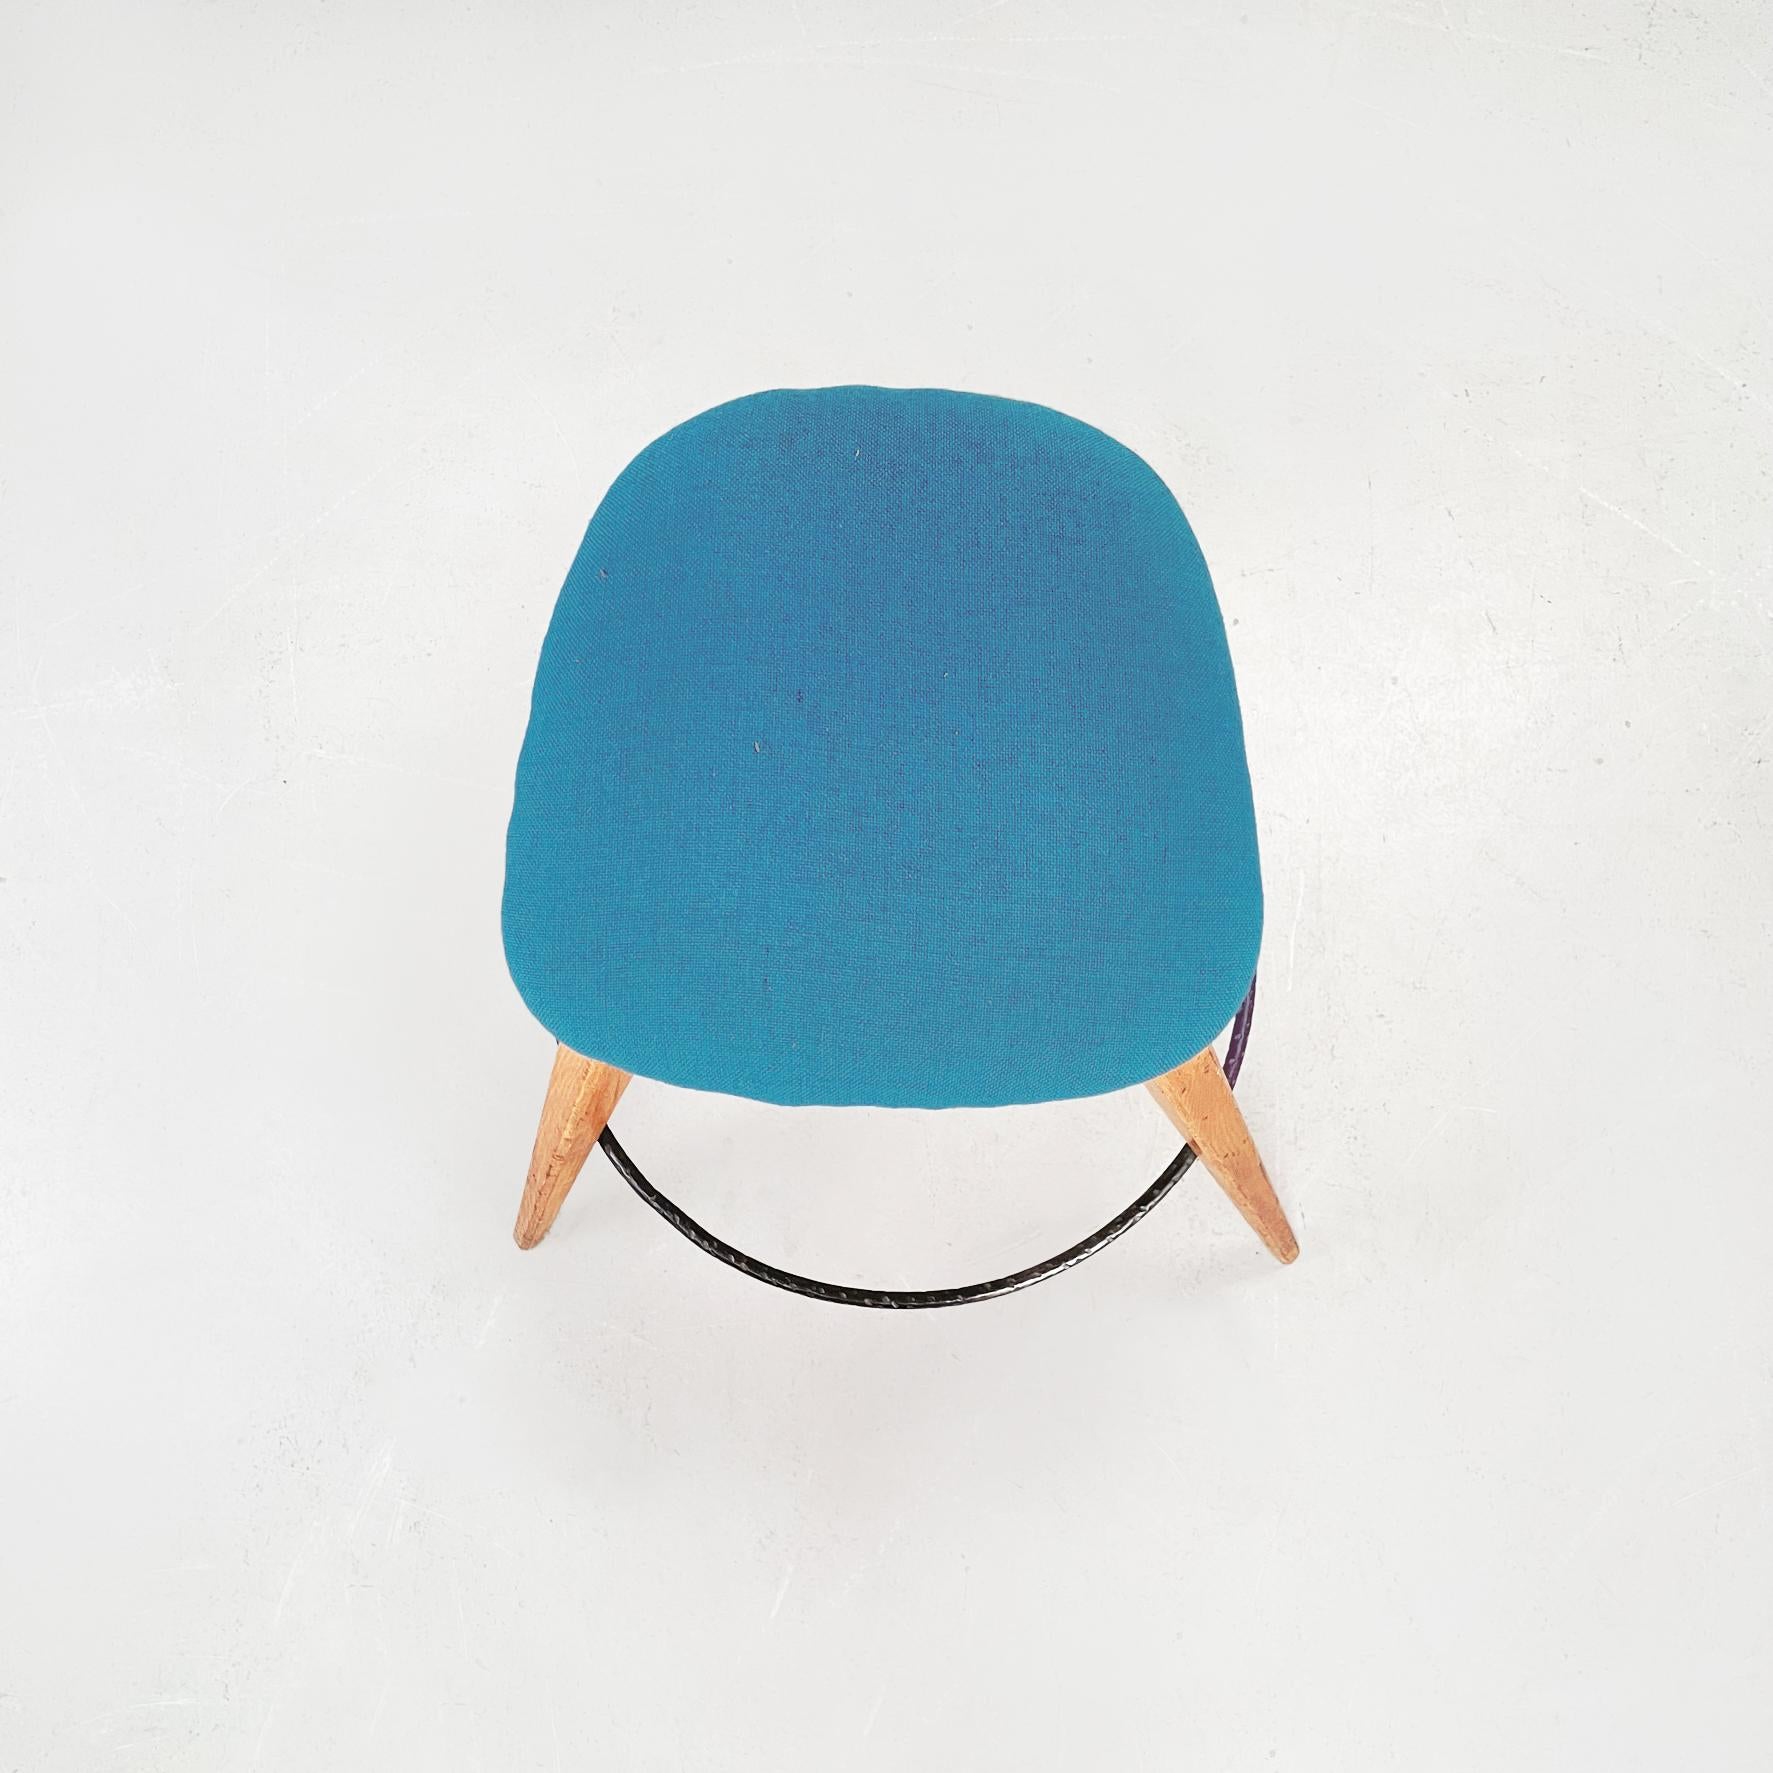 Mid-20th Century Italian Mid-Century Modern Stools in Wood, Black Iron and Blue Fabric, 1960s For Sale